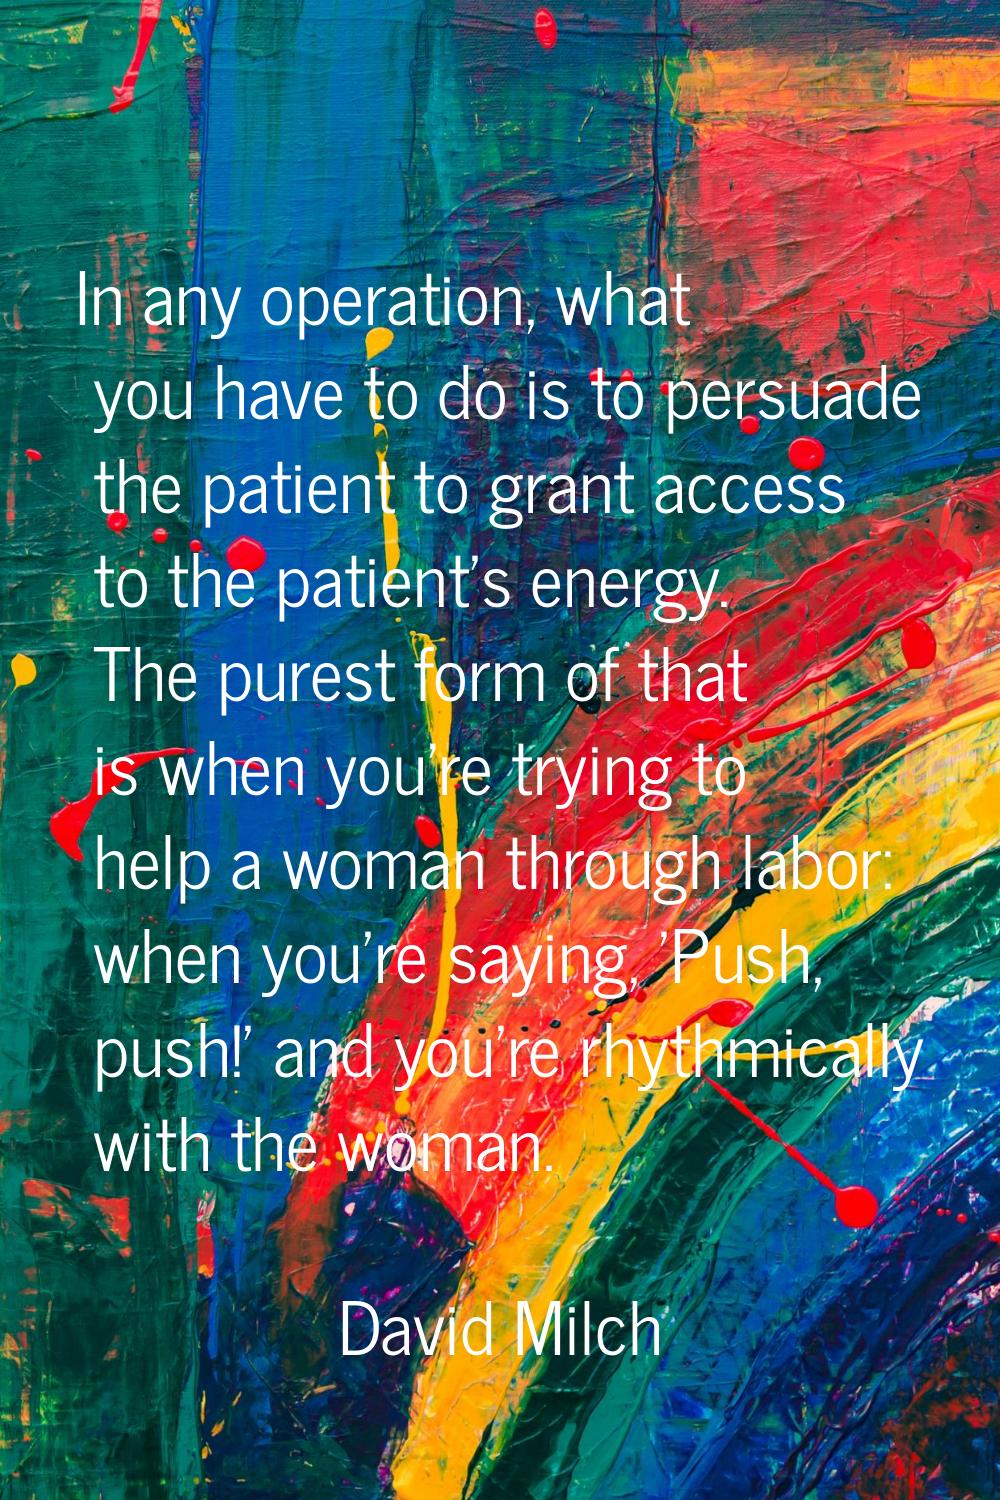 In any operation, what you have to do is to persuade the patient to grant access to the patient's e